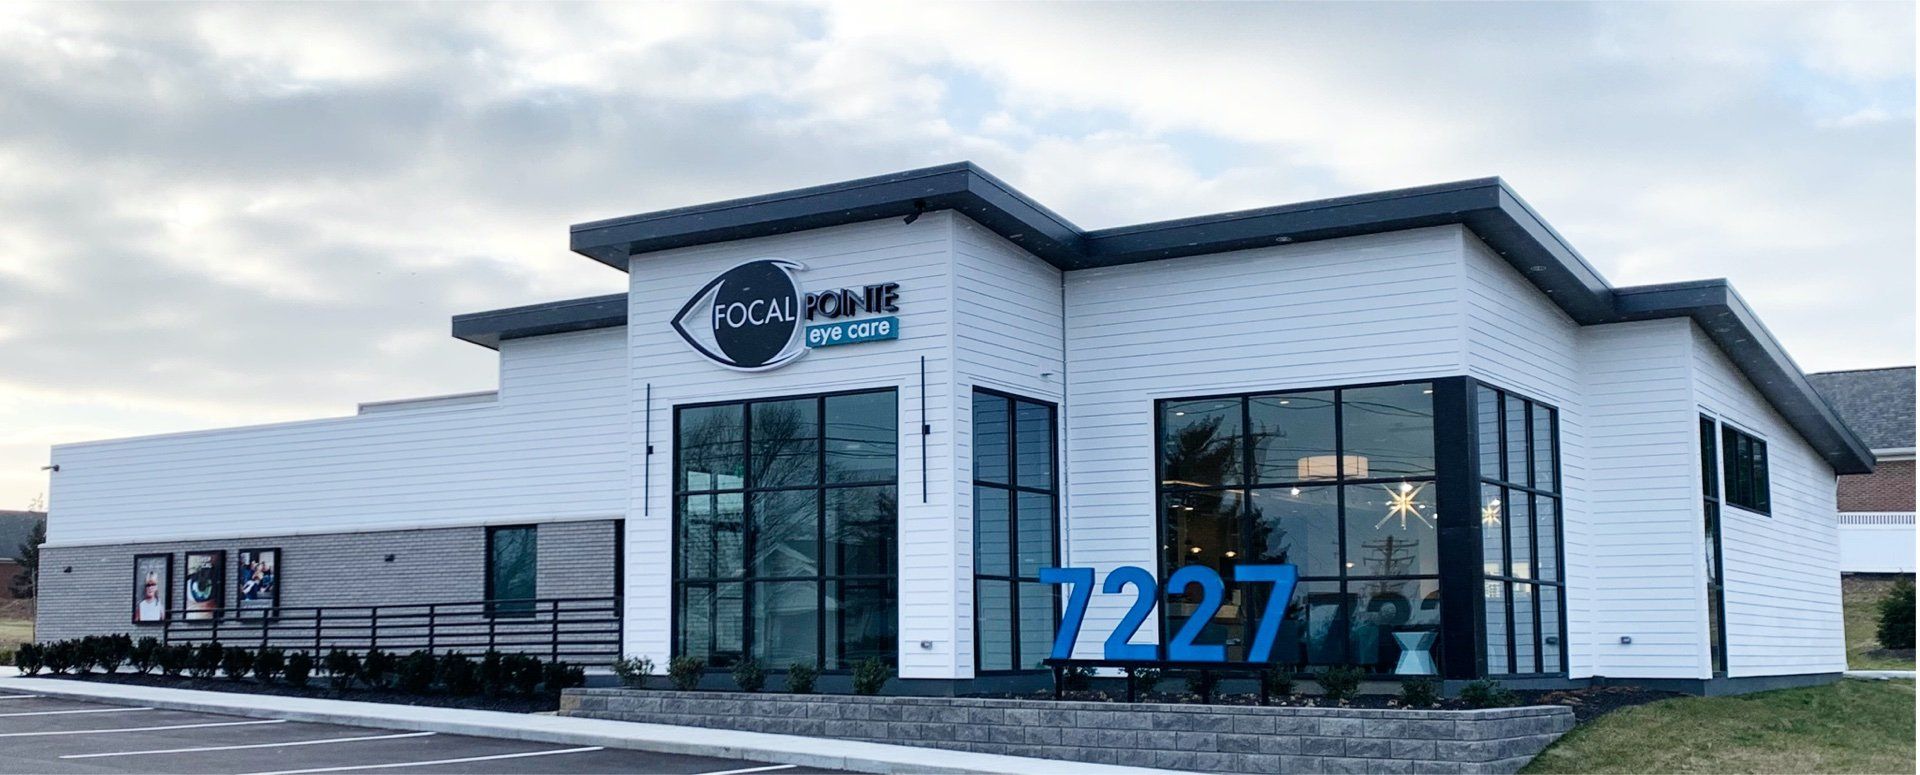 Exterior view of Focal Pointe Eye Care  West Chester Ohio office